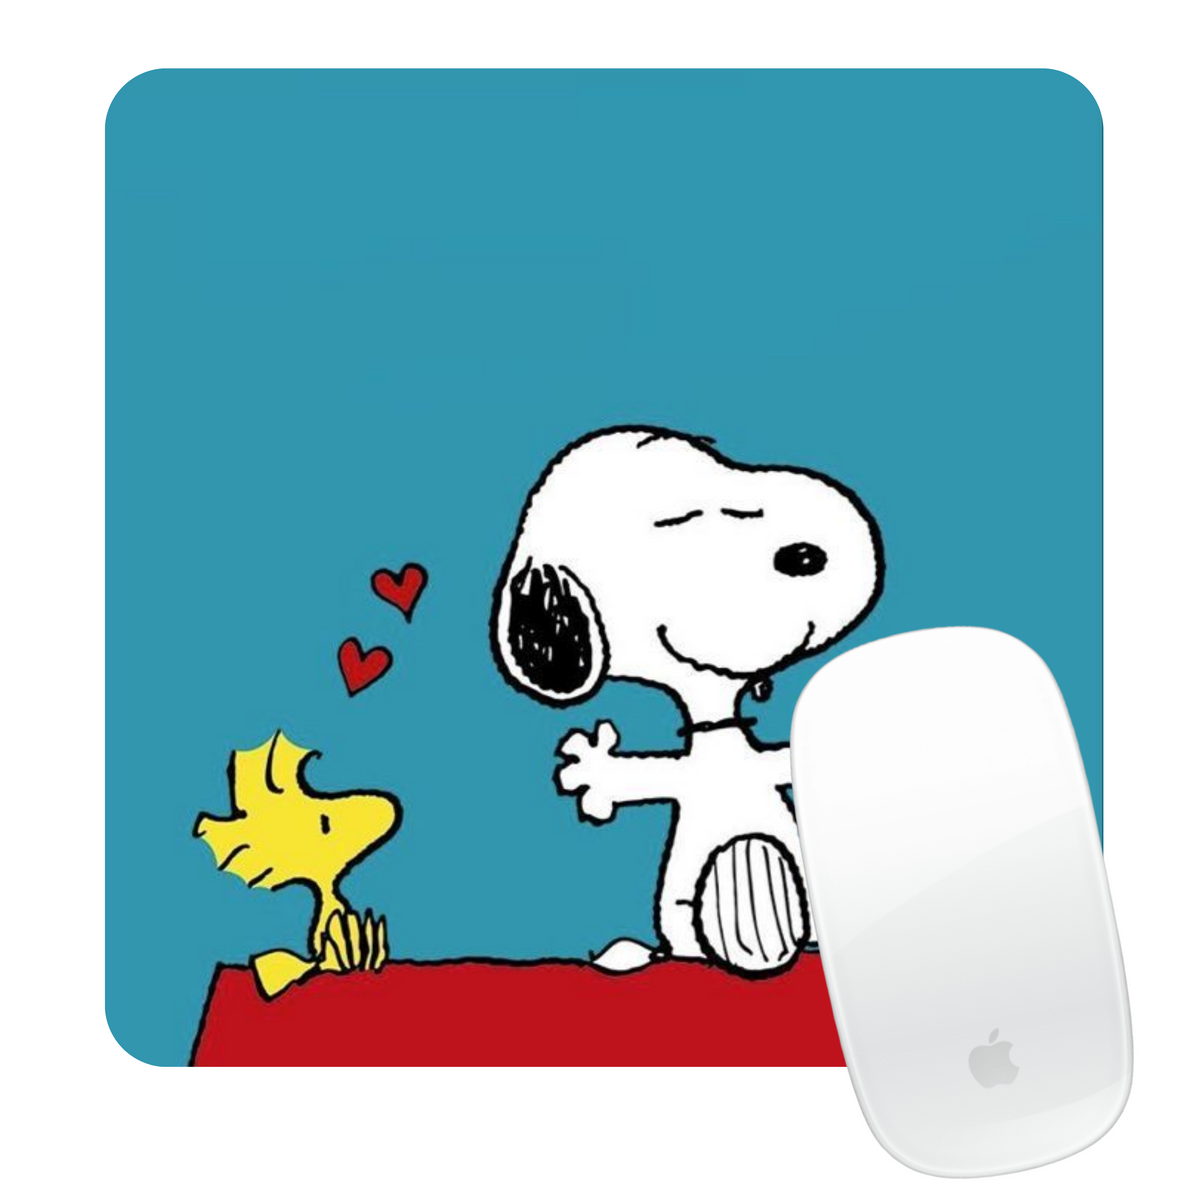 MOUSE PAD SNOOPY WOODSTOCK